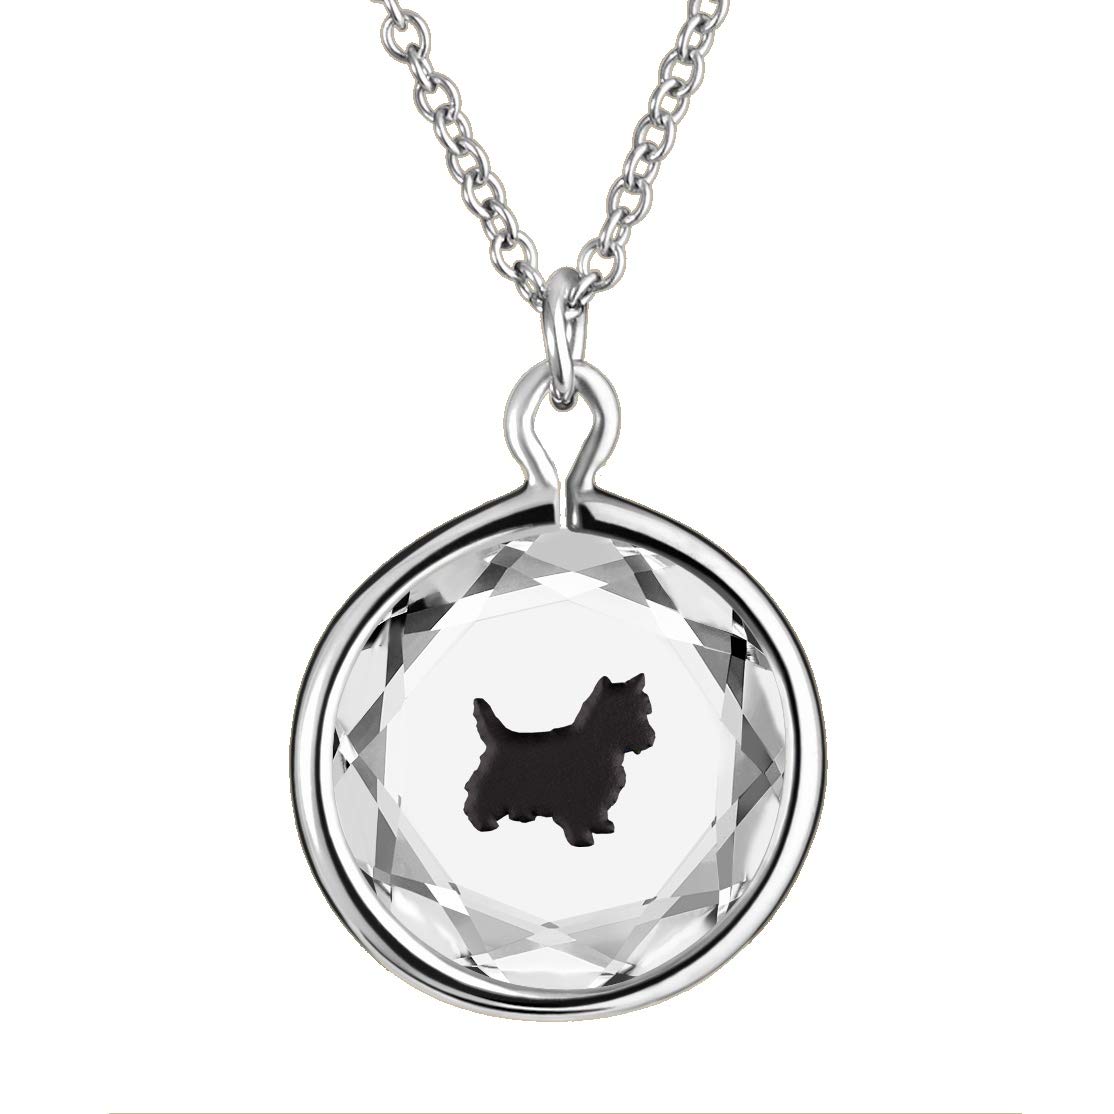 LovePendants Engraved and Enameled Swarovski Crystal Yorkie Pendant/Necklace in Sterling Silver